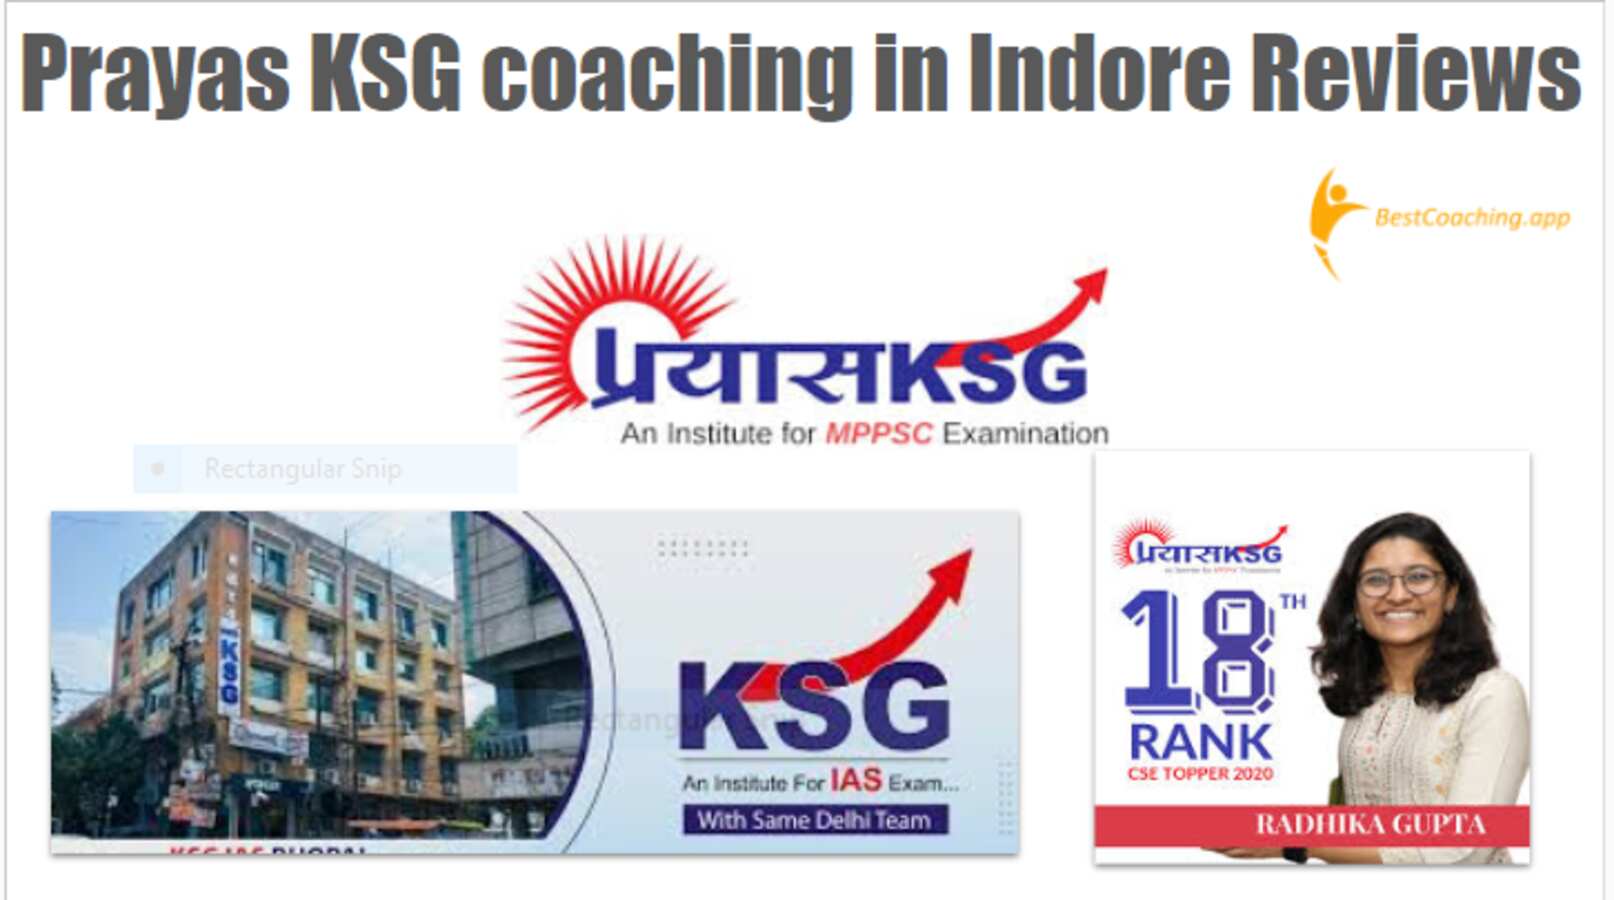 PrayasKSG MPPSC Coaching in Indore review